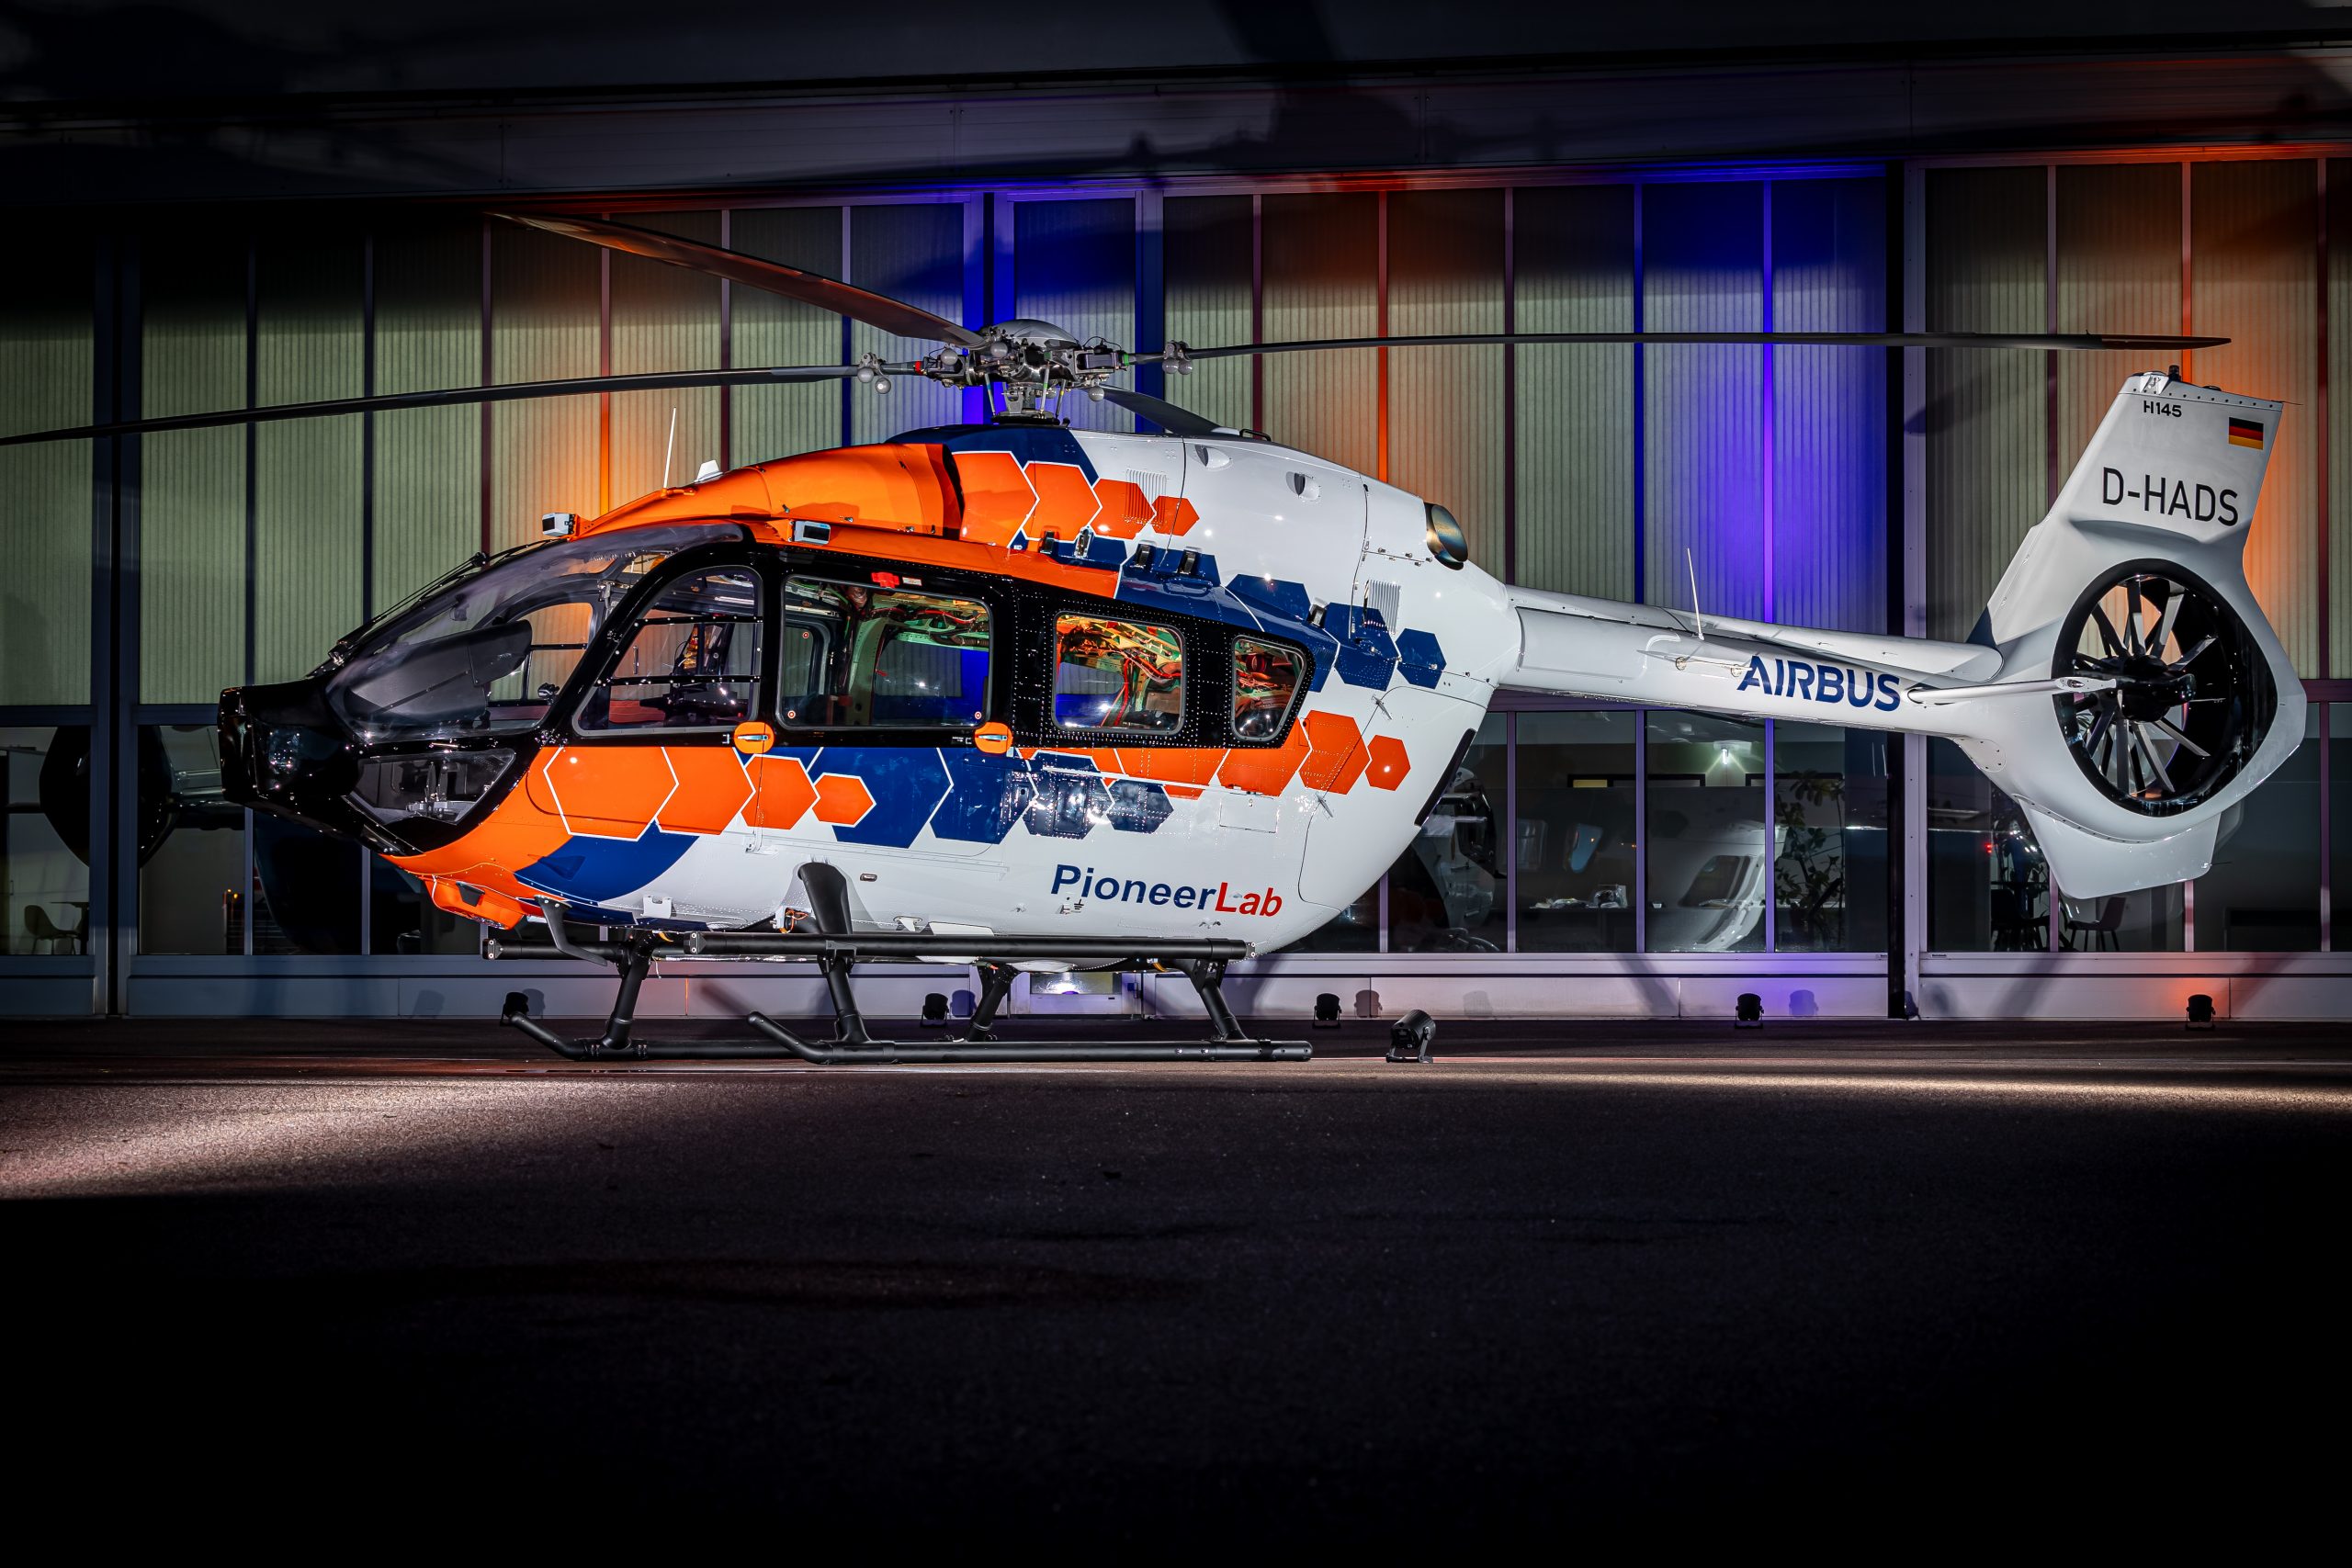 Airbus Helicopters PioneerLab (4)